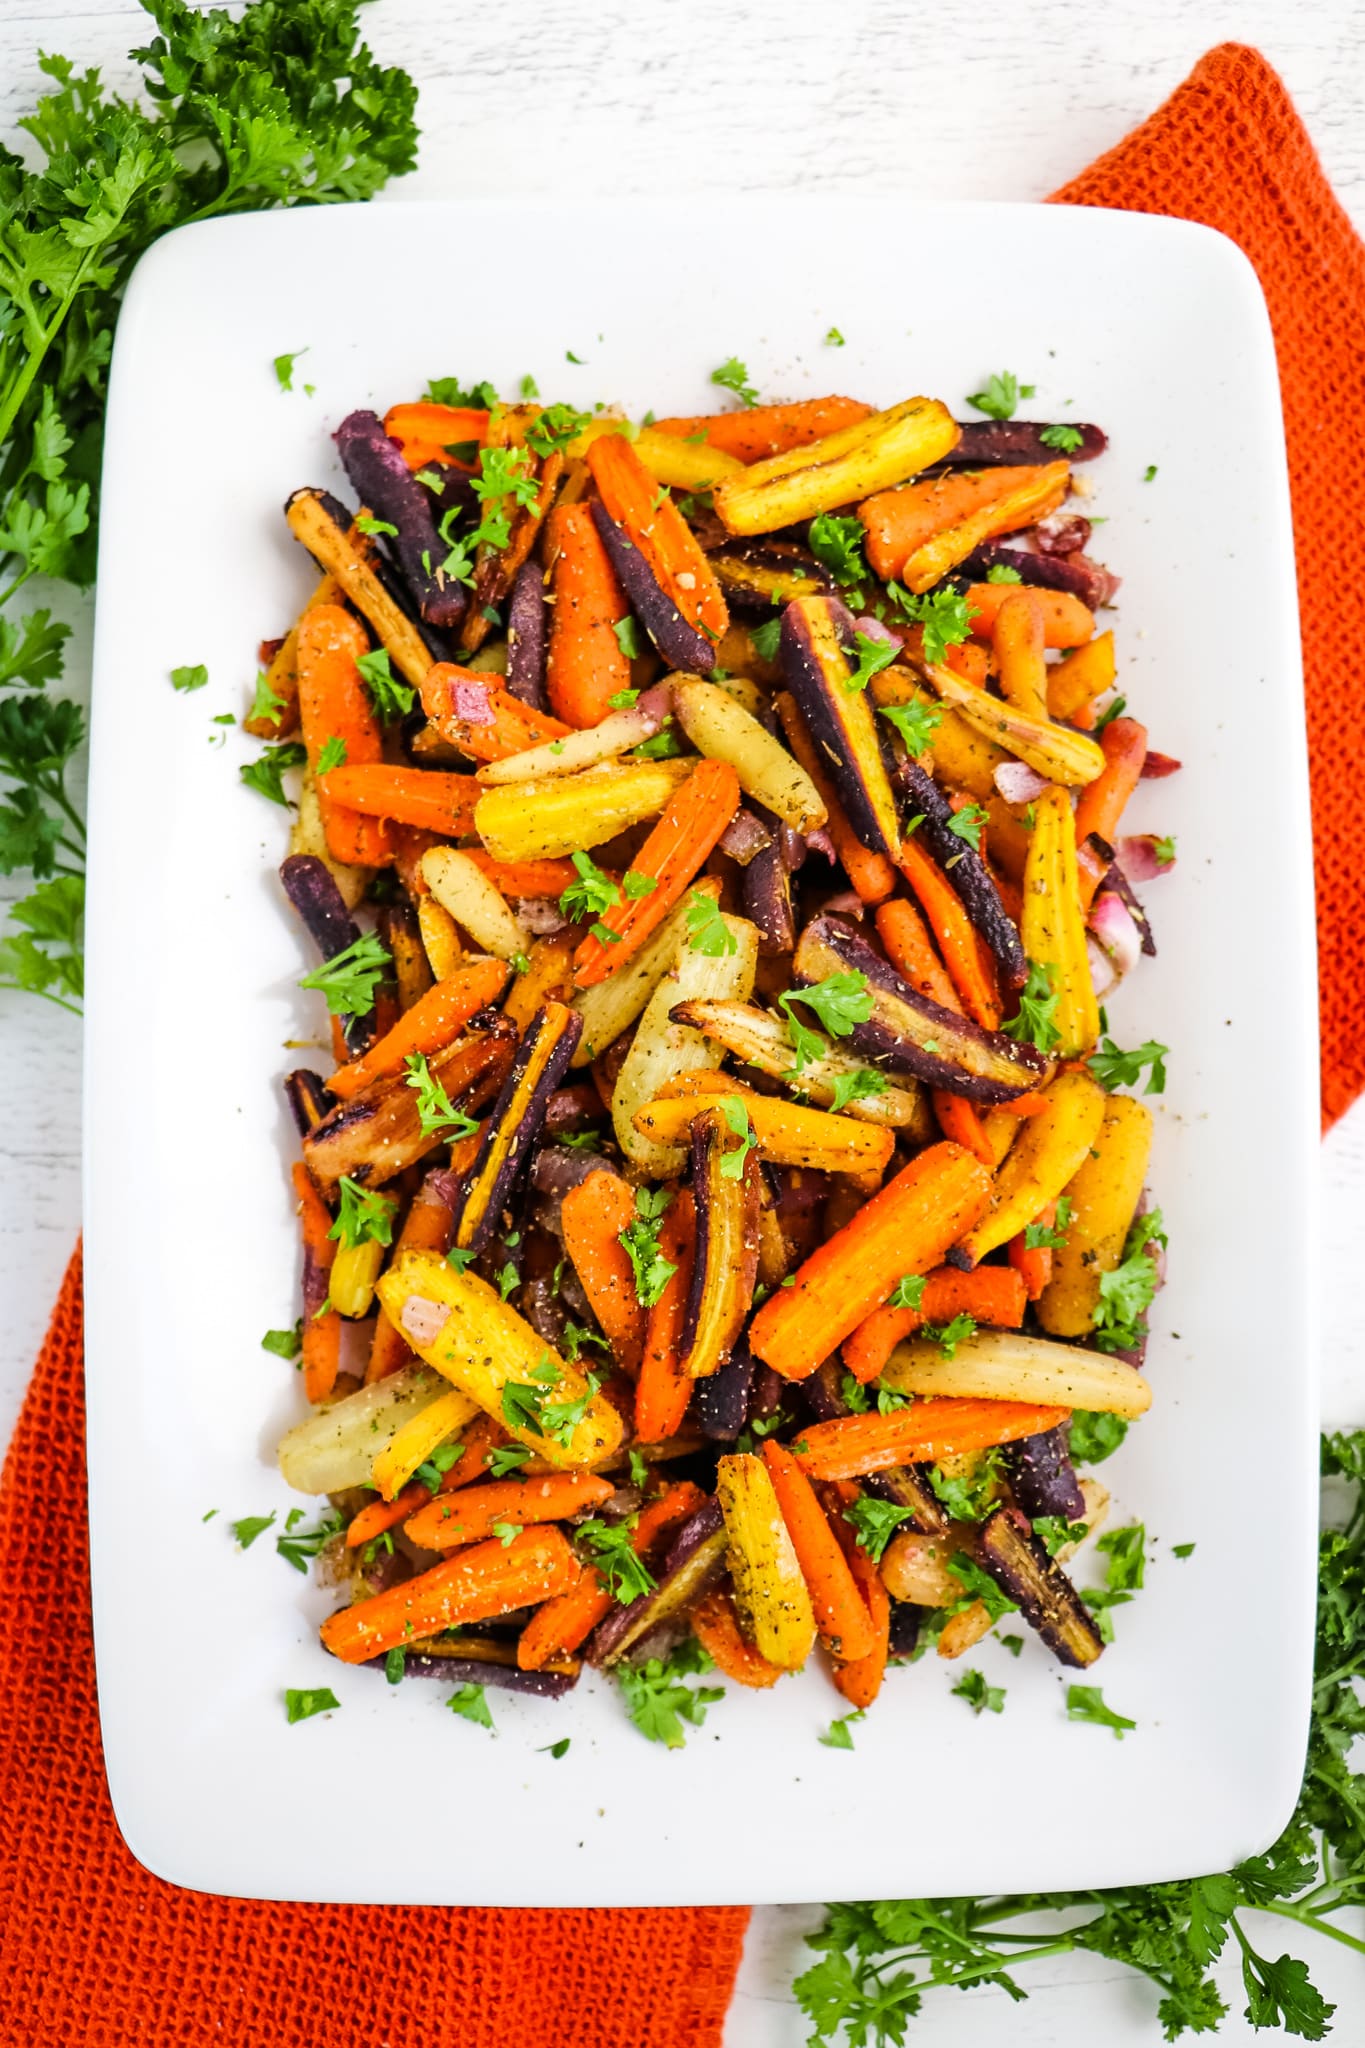 Roasted rainbow carrots on white platter topped with chopped parsley.